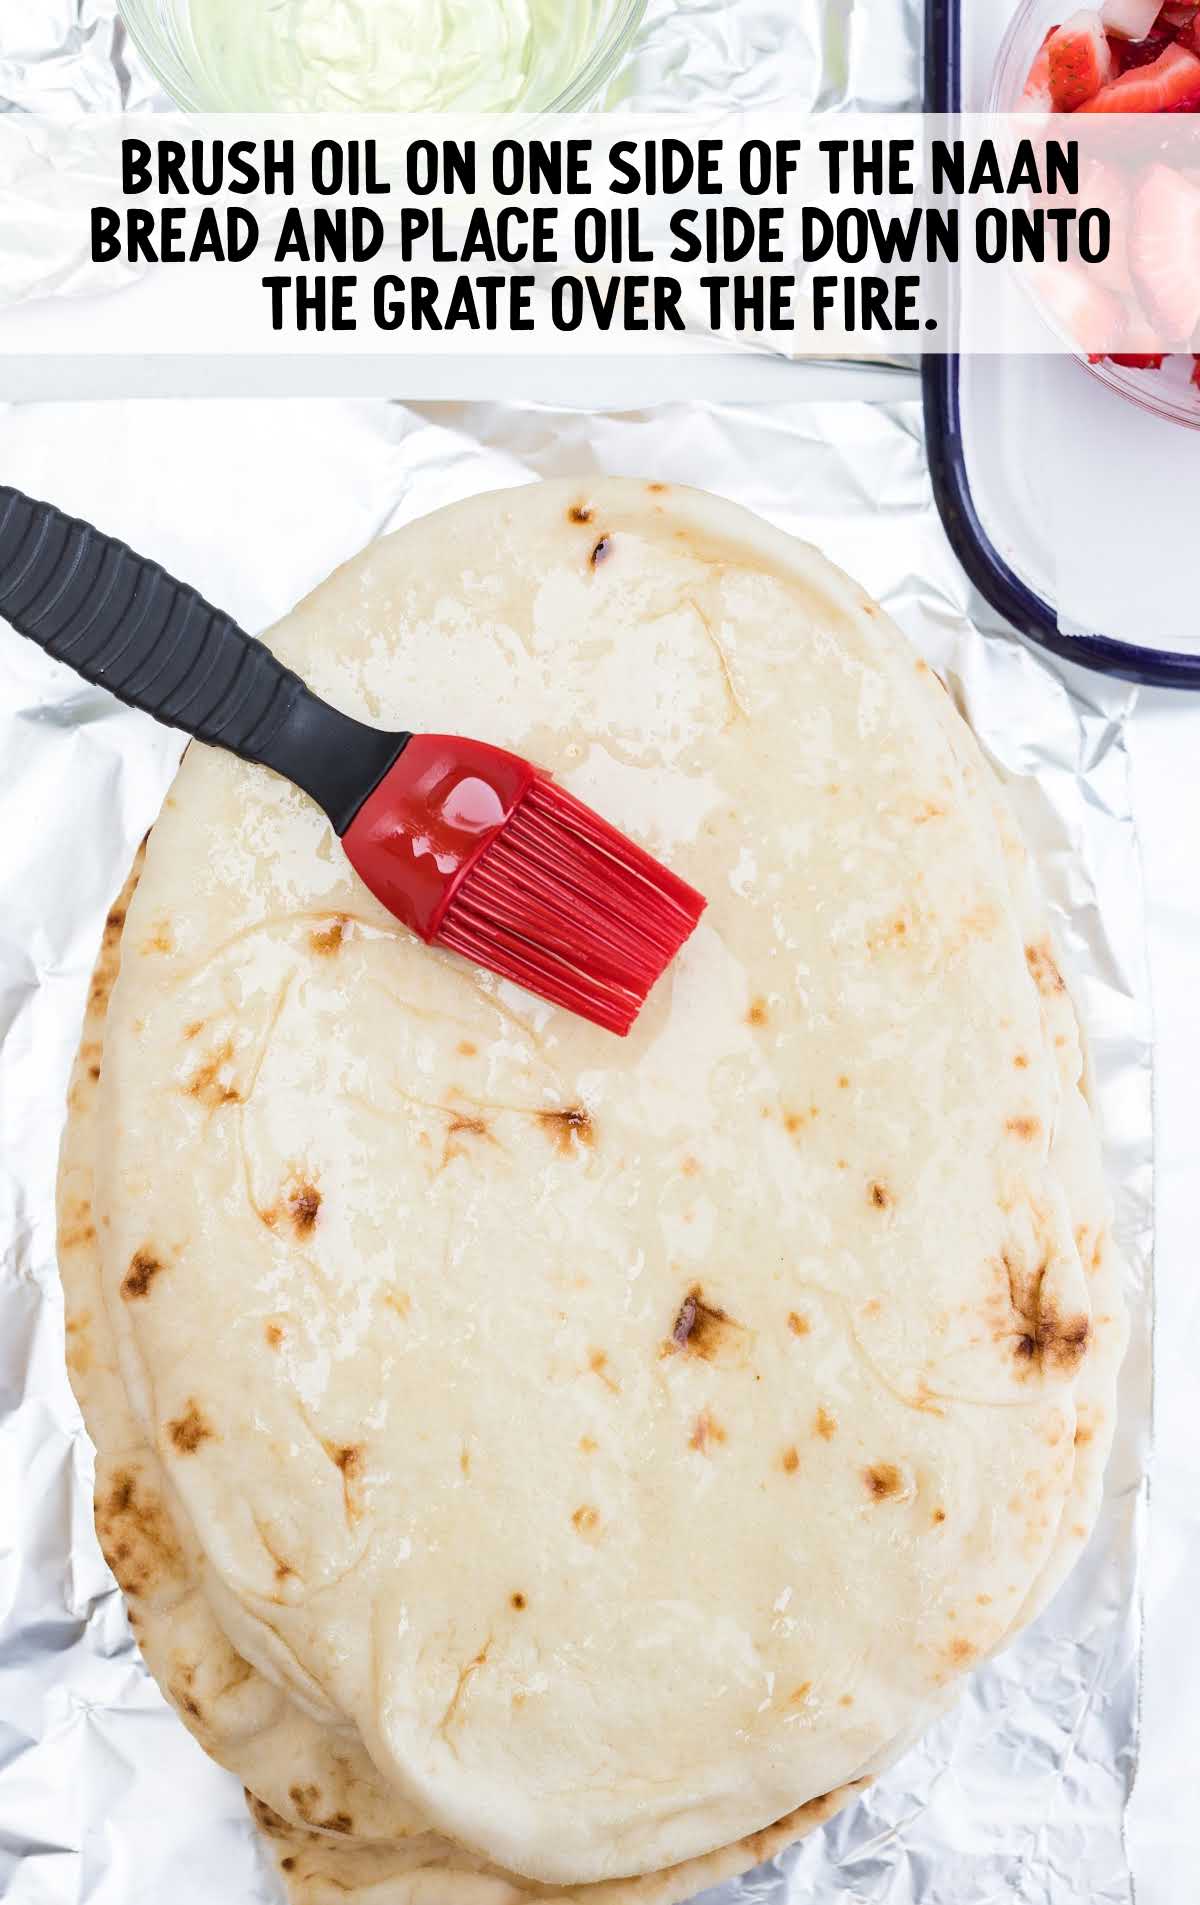 naan bread brushed with oil